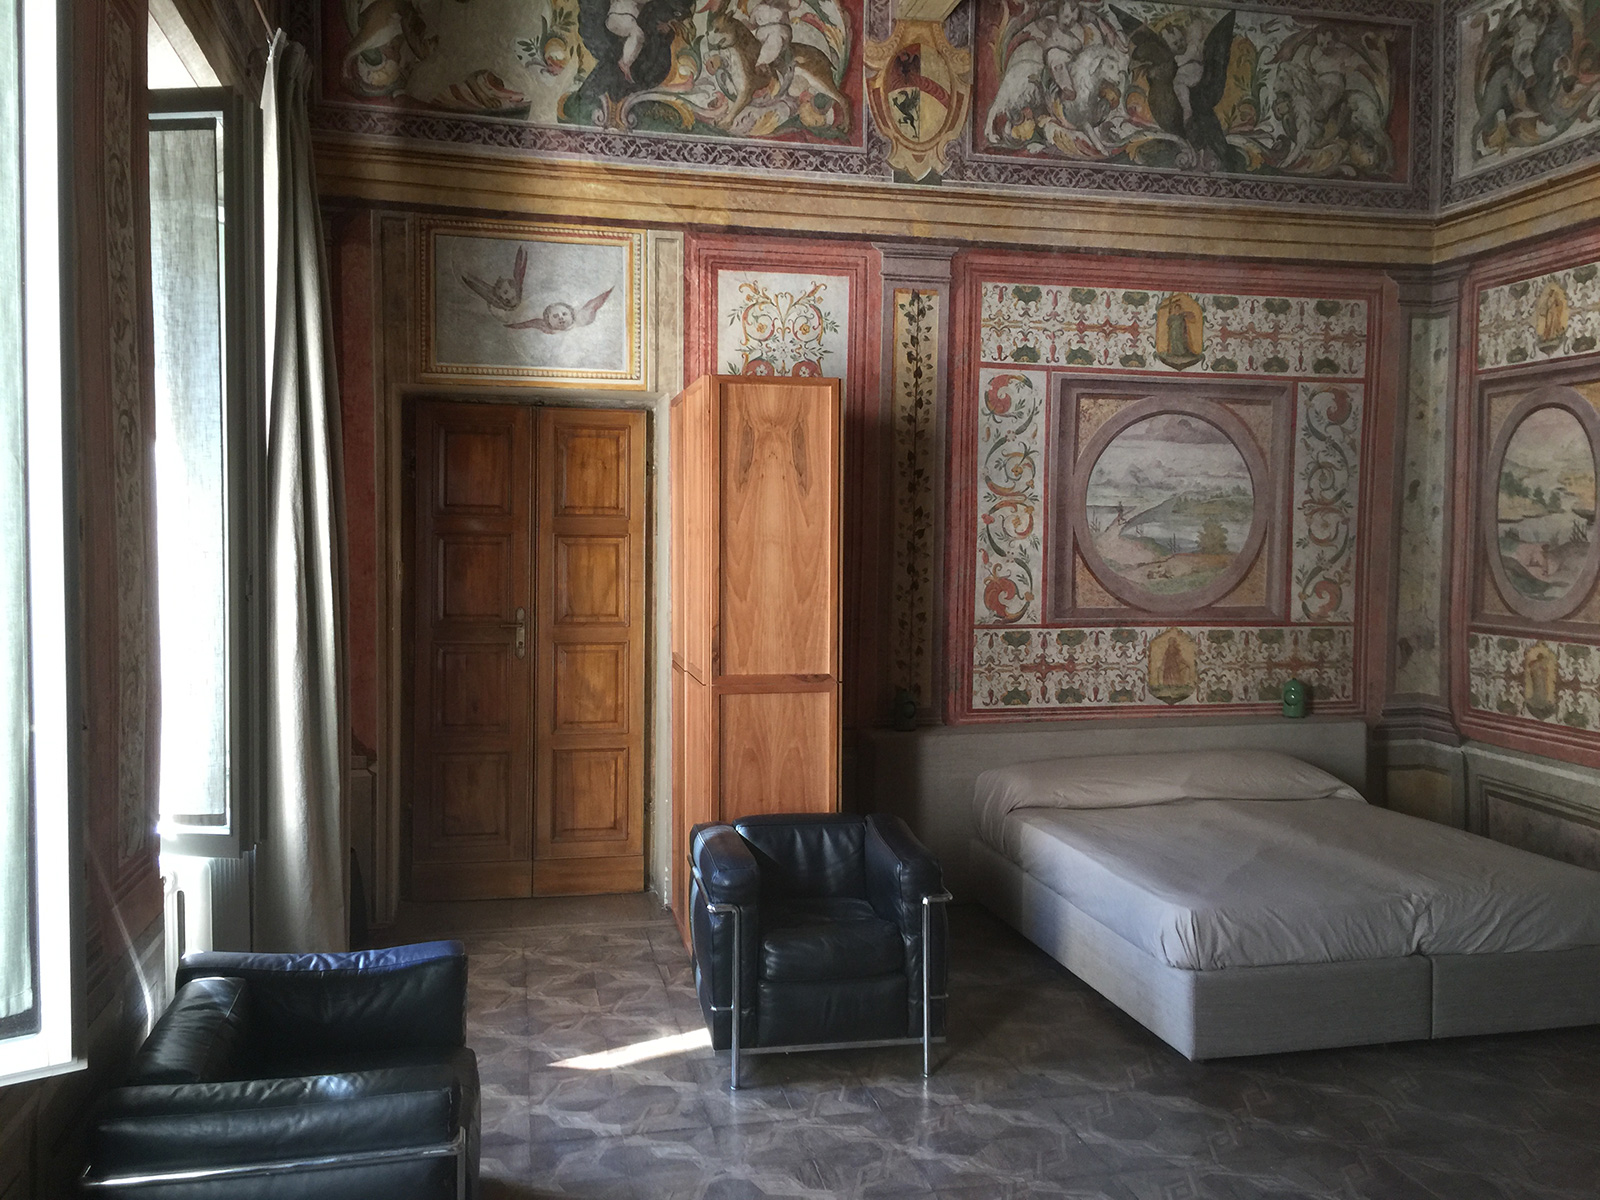 Guests can immerse themselves in art & design at Palazzo Beccaguti Cavriani